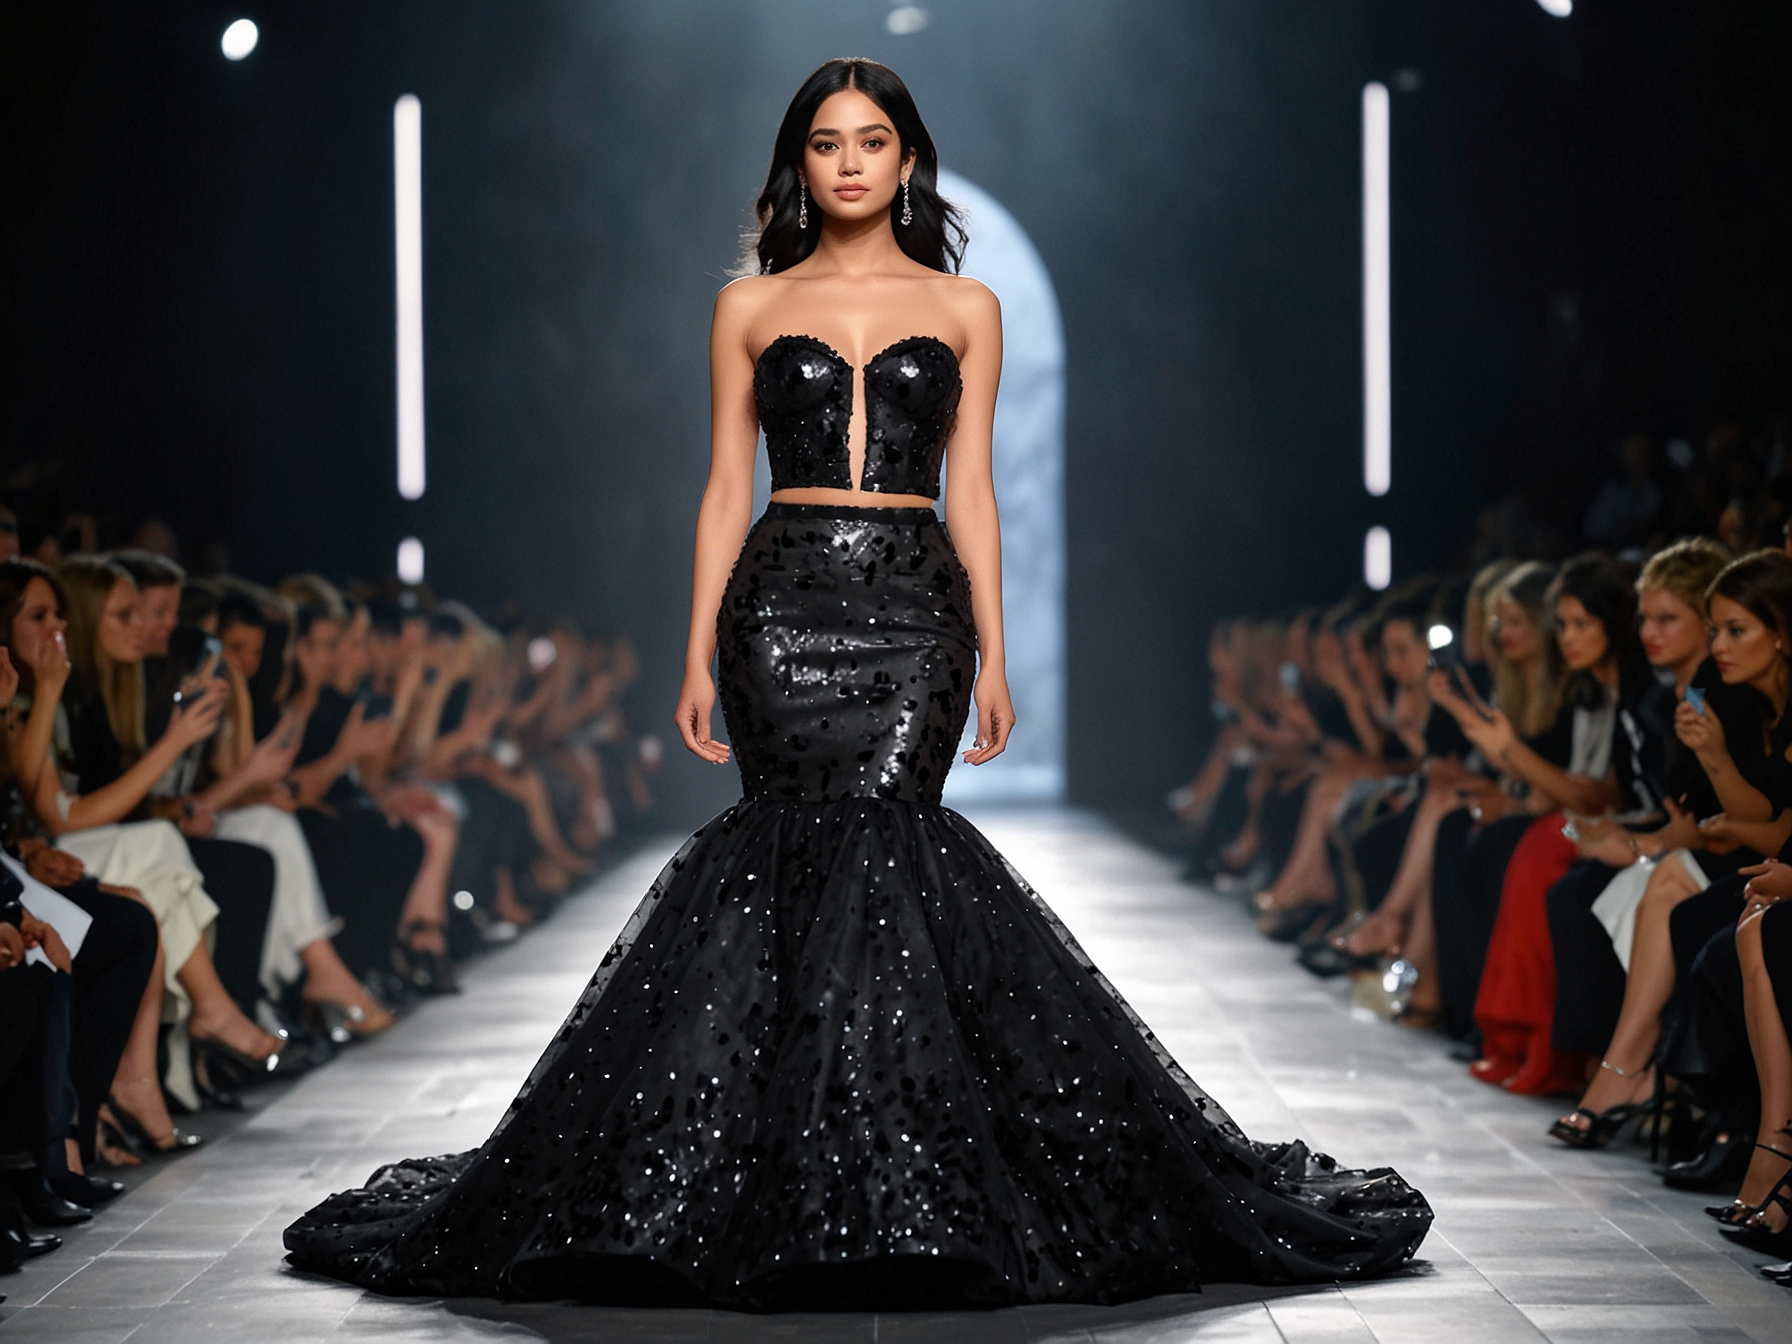 Janhvi Kapoor dazzles on the runway at Paris Fashion Week 2024, wearing a black bustier top and sequined mermaid-style skirt from Rahul Mishra's 'Aura' collection.